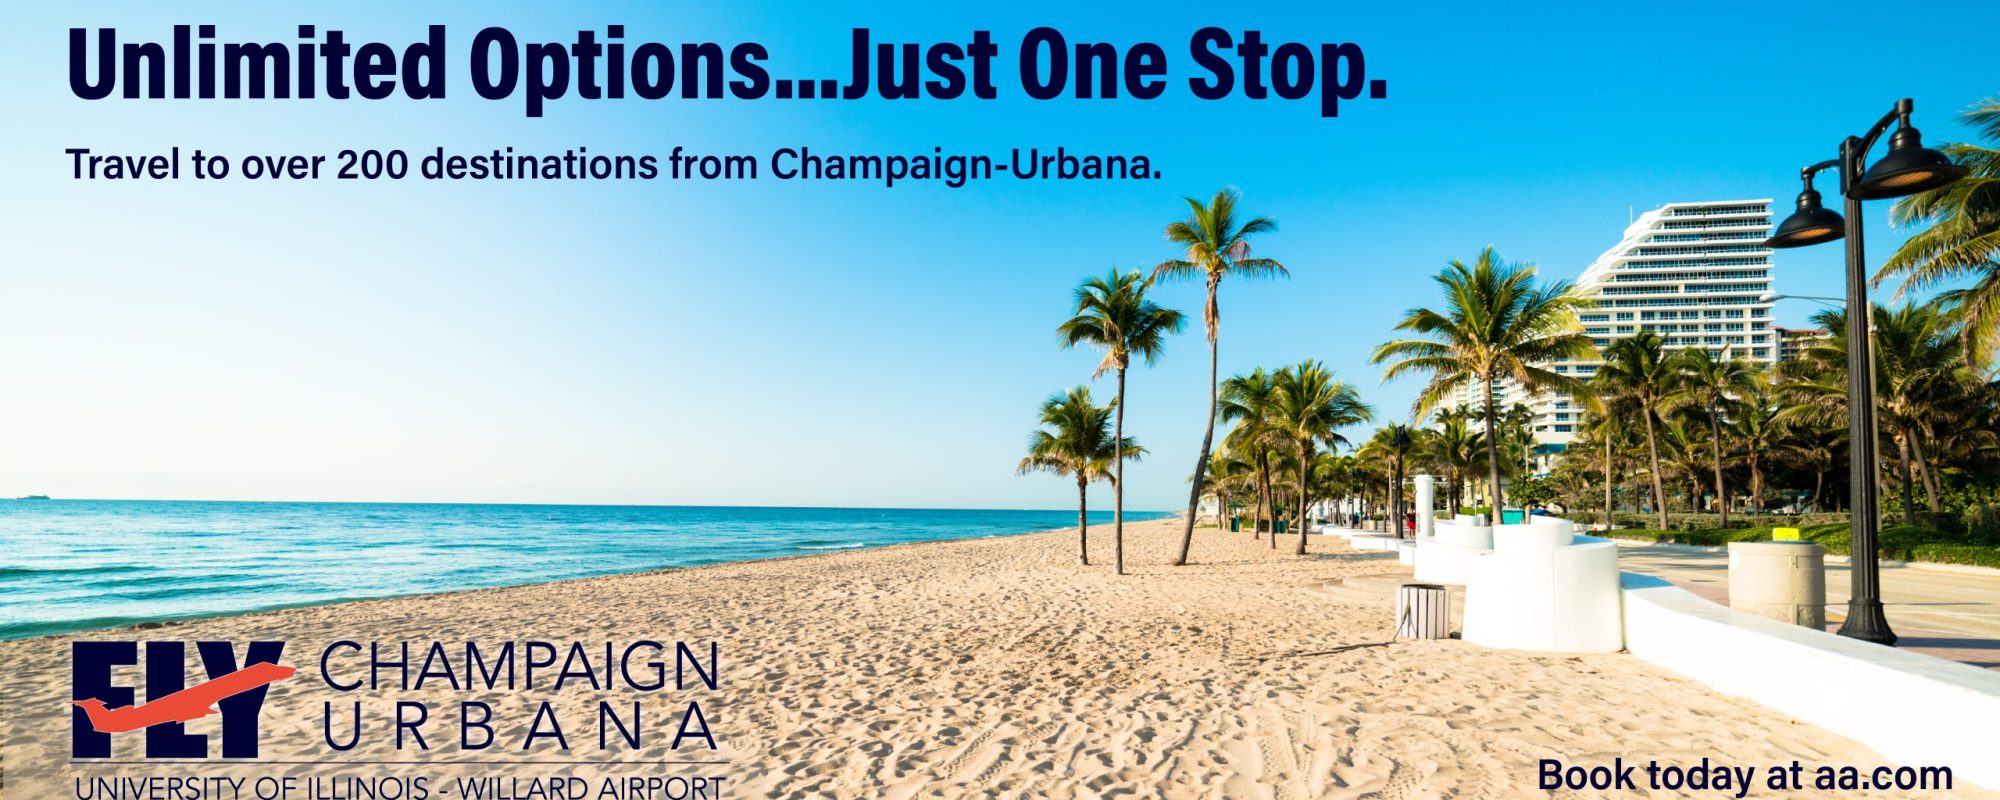 Unlimited Options-Over 200 Destinations